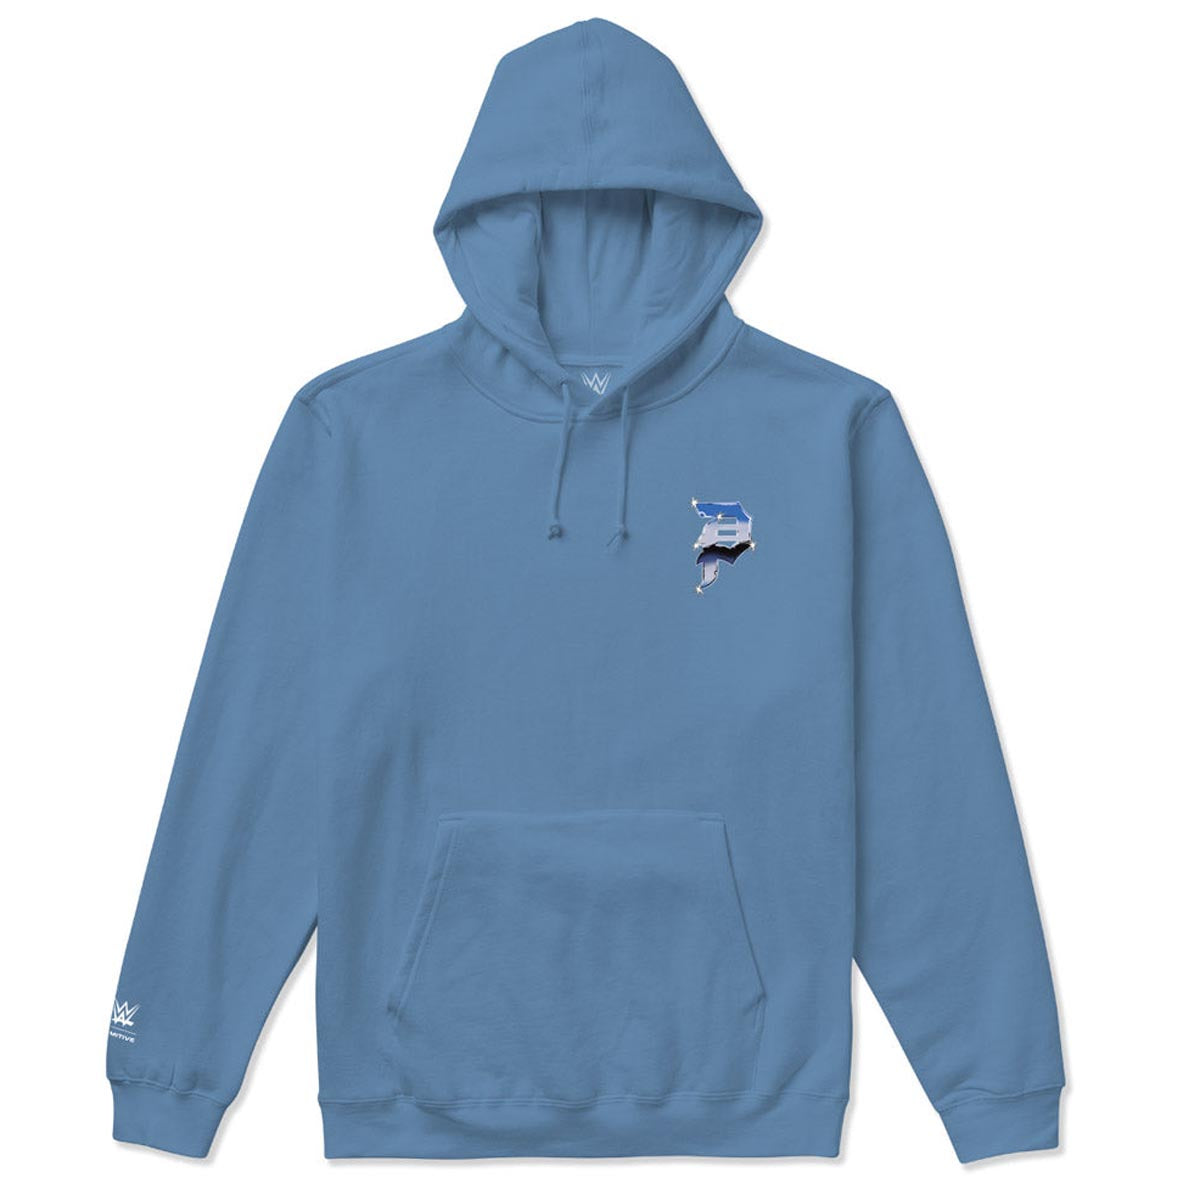 Primitive x WWE Cold One Hoodie - Columbia Blue image 2